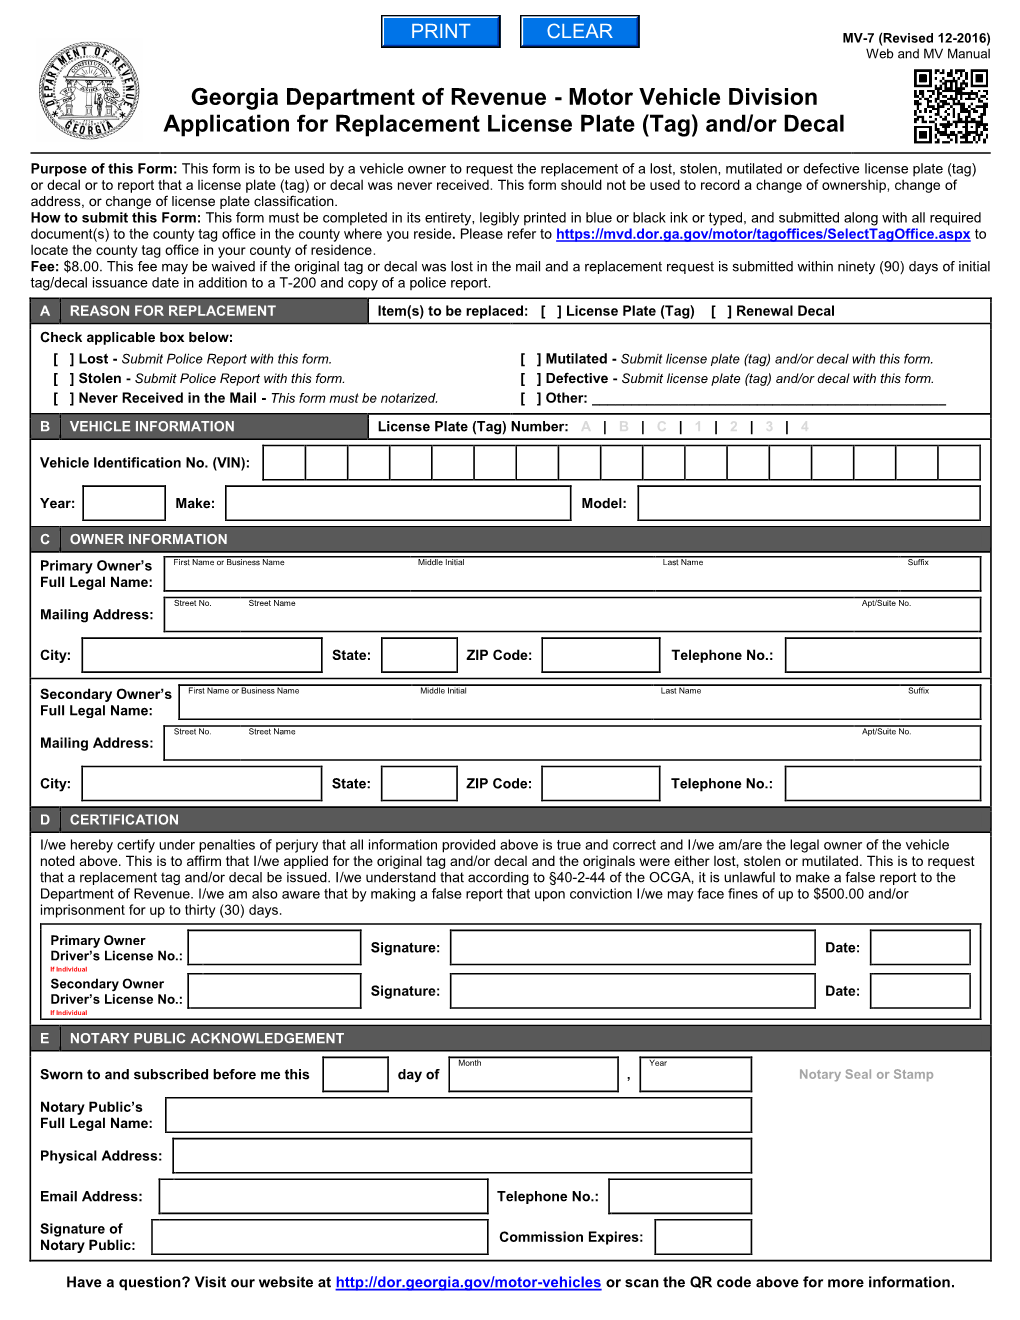 MV-7 Application for a Replacement License Plate (Tag) and Or Decal